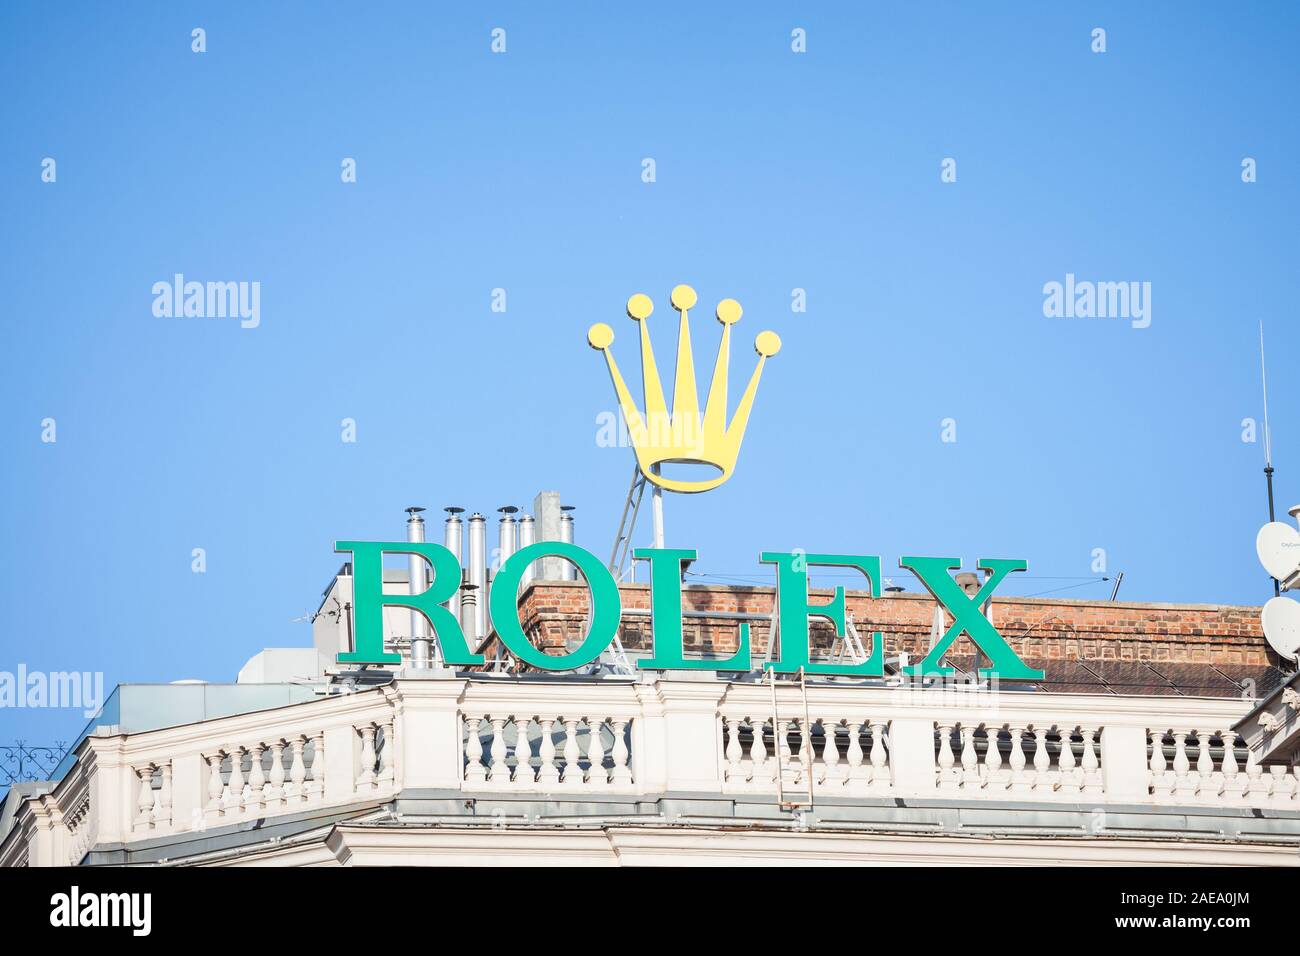 signage stock photography and images - Alamy